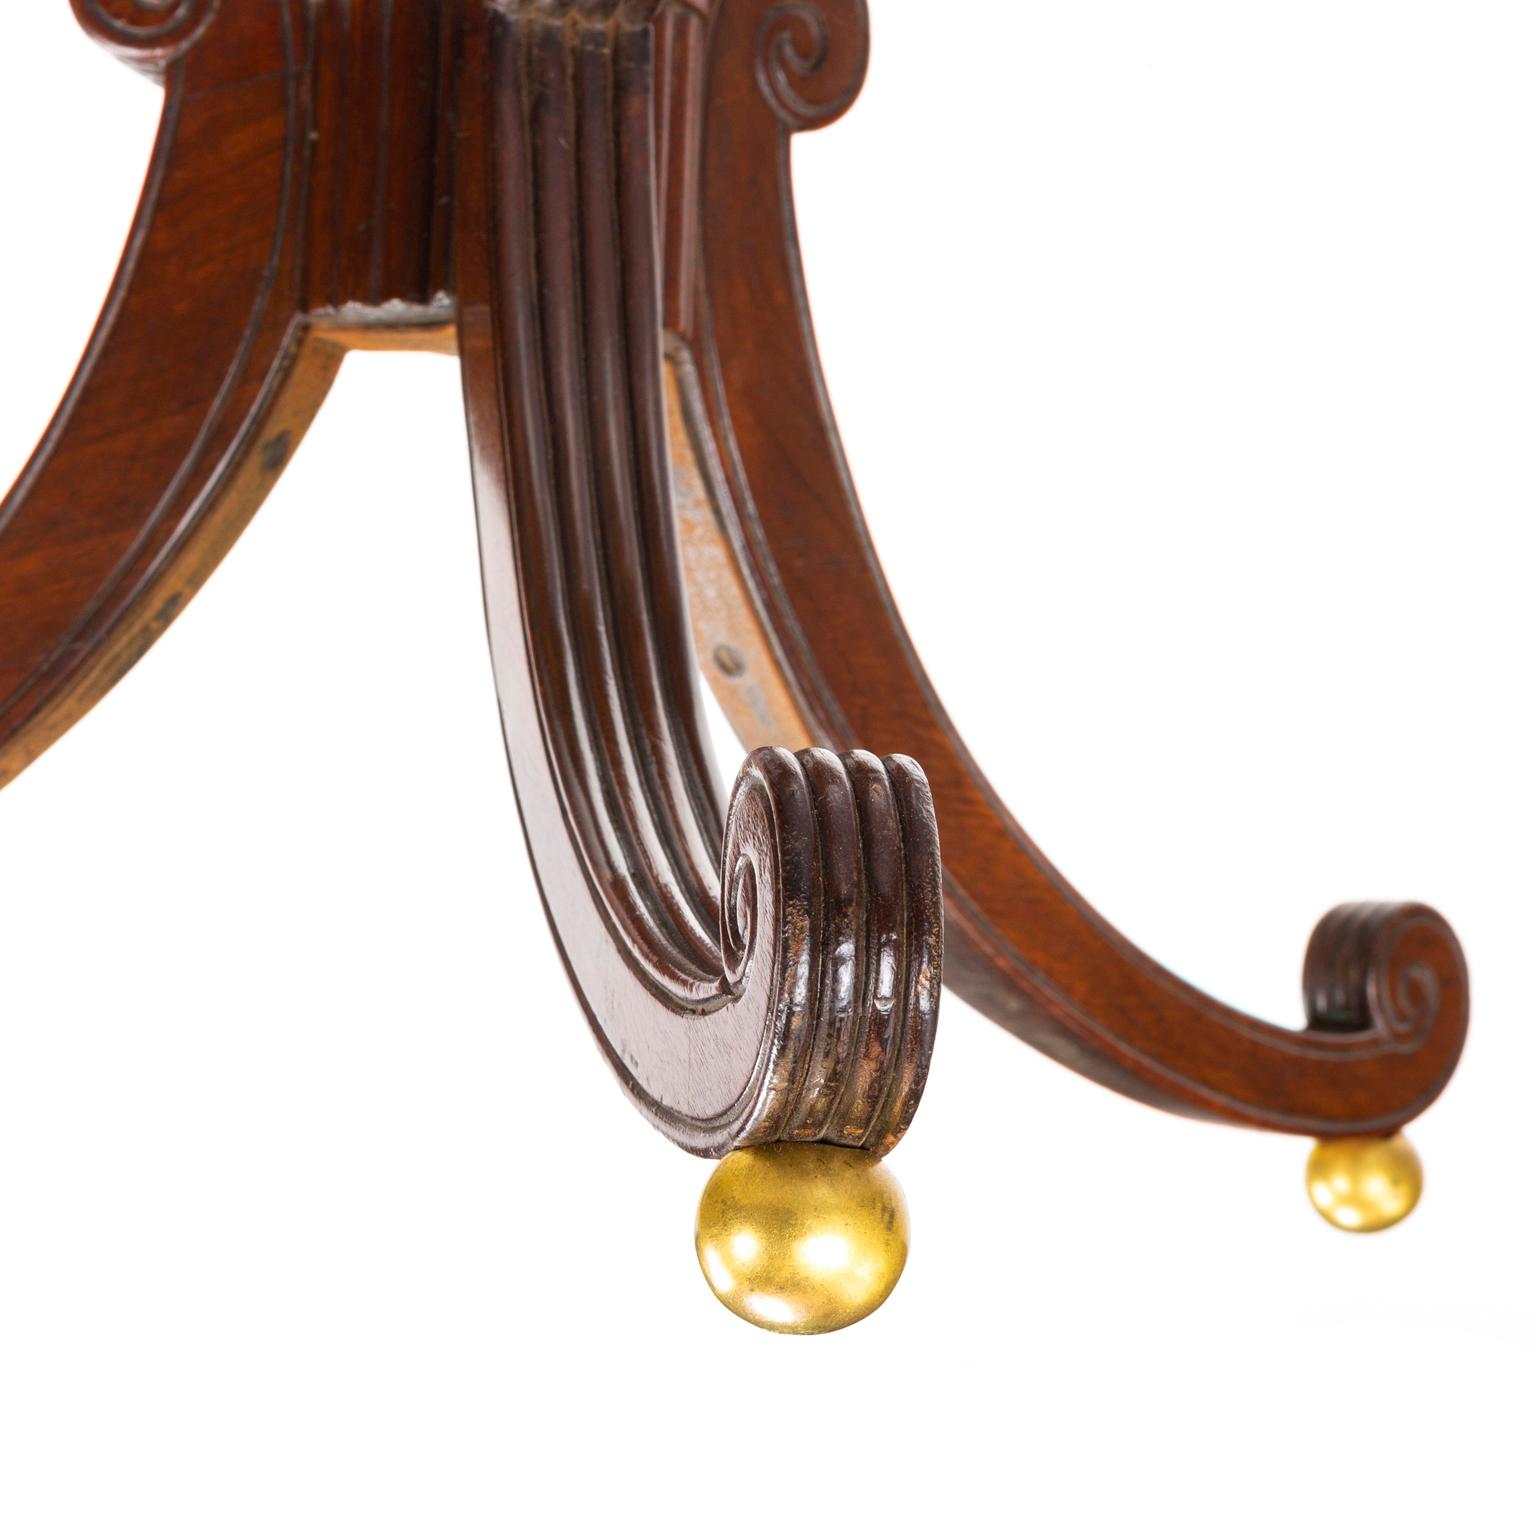 Mahogany Regency Pedestal Table Attributed to Gillows of Lancaster and London in Plumb Pu